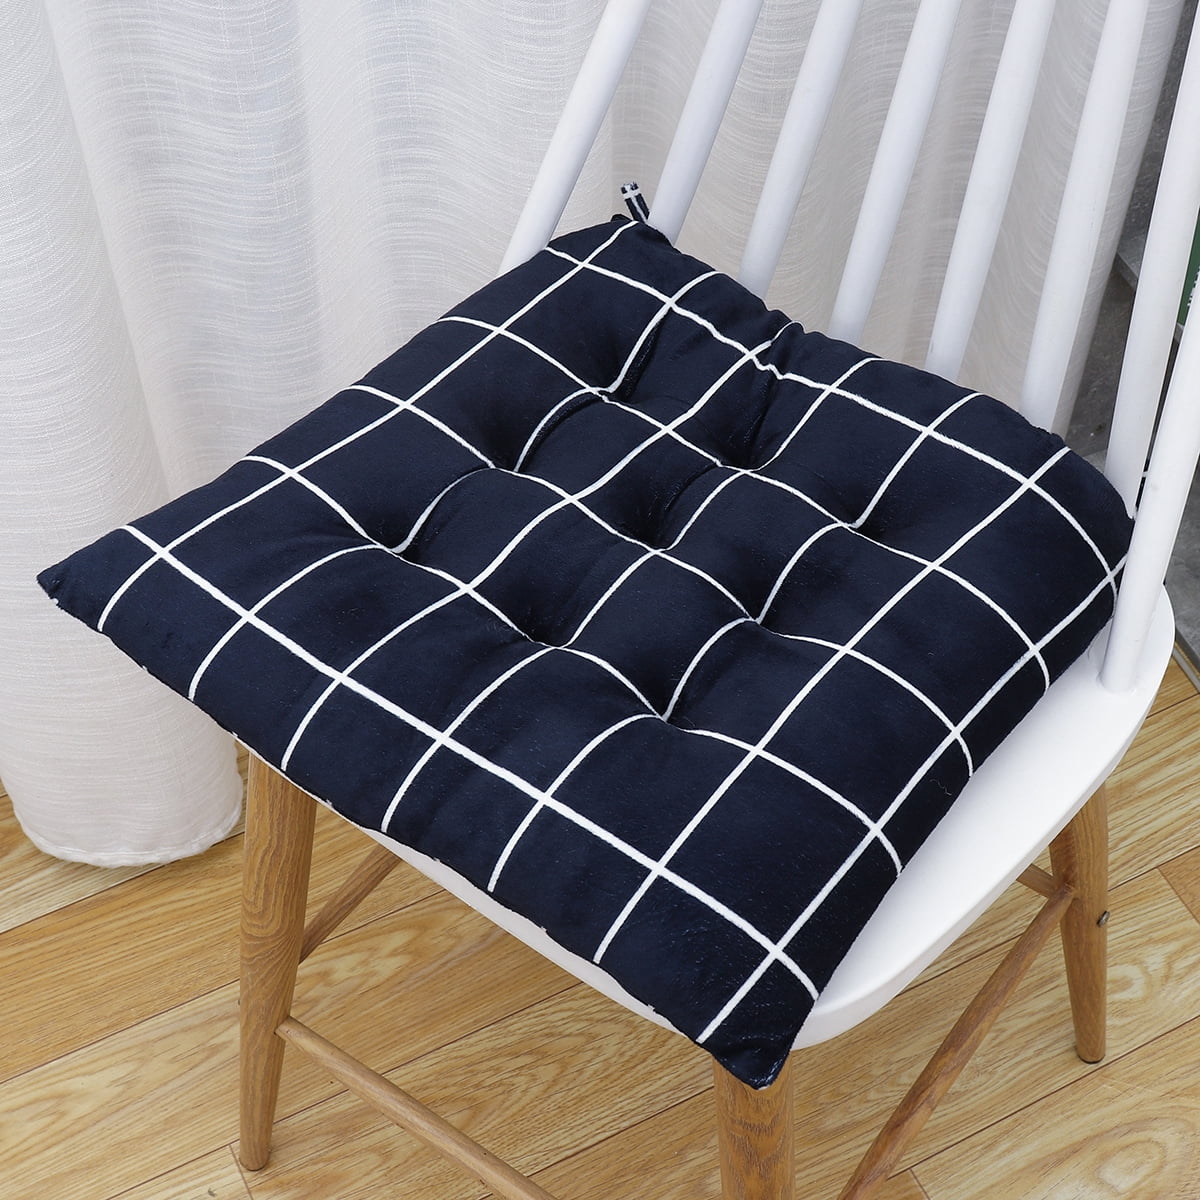 1/2/4X Soft Seat Pad Dining Room Kitchen Garden Tie On Chair Cushions Home Decor 